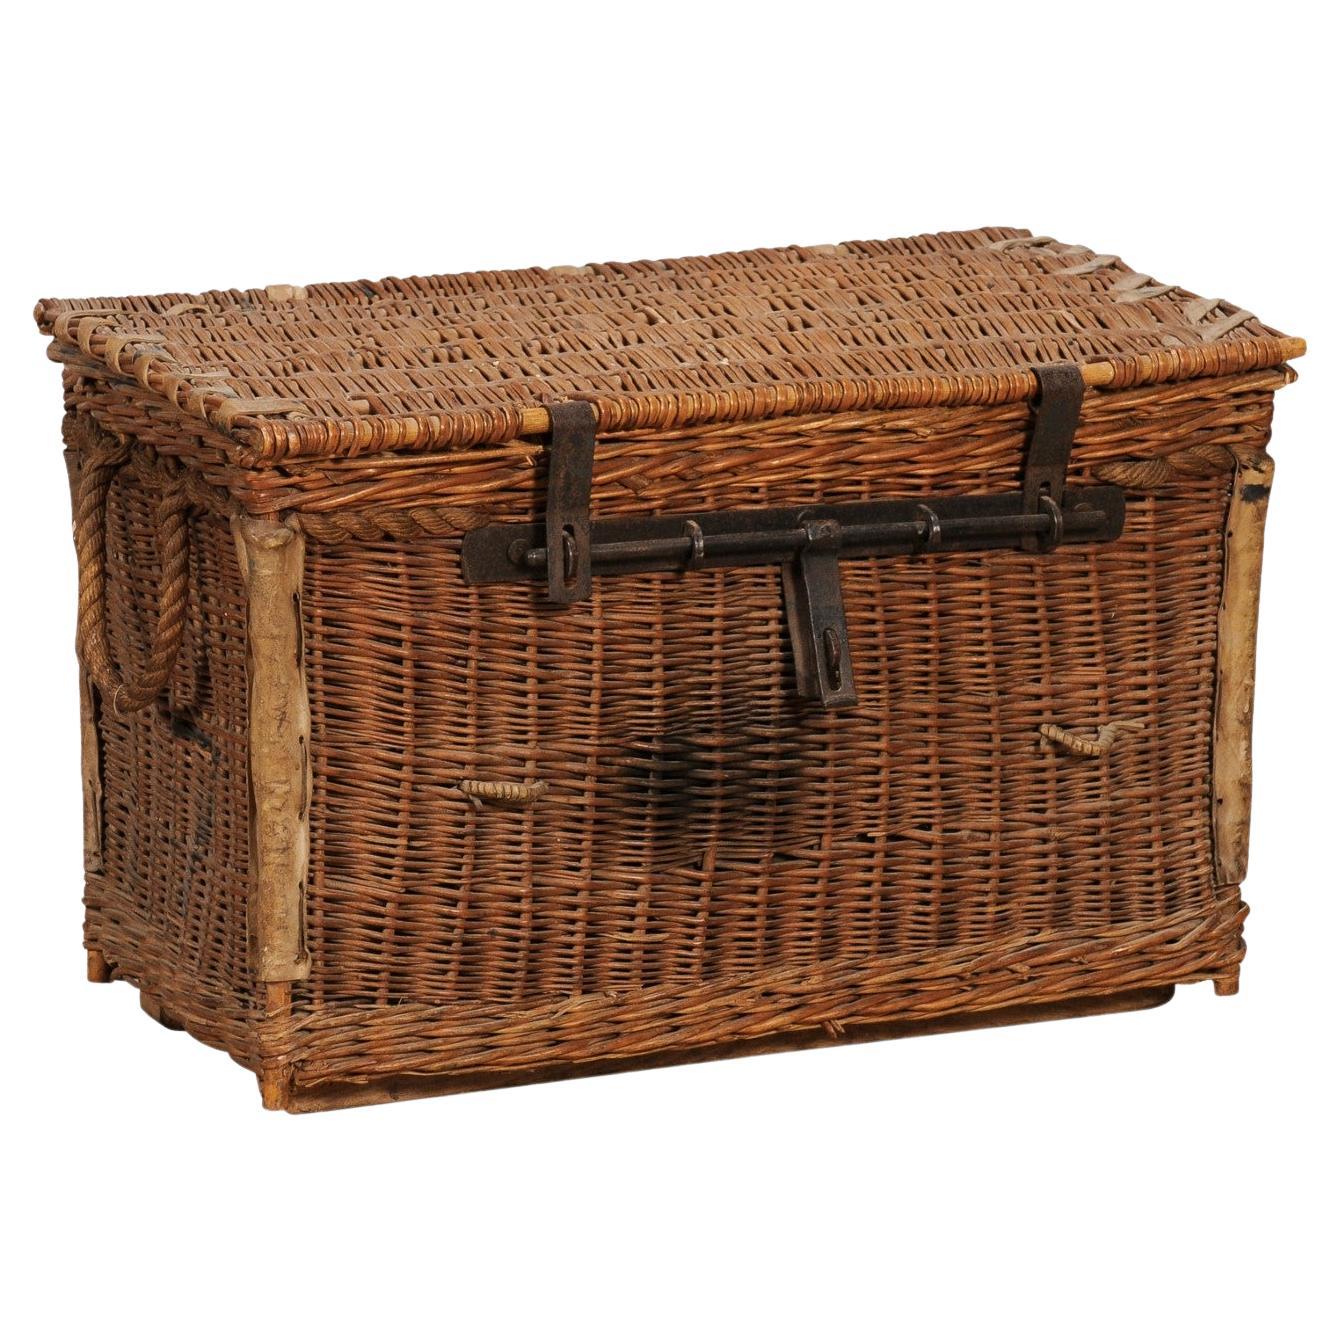 English Rustic 1930s Wicker Trunk with Iron Hardware and Lateral Handles For Sale